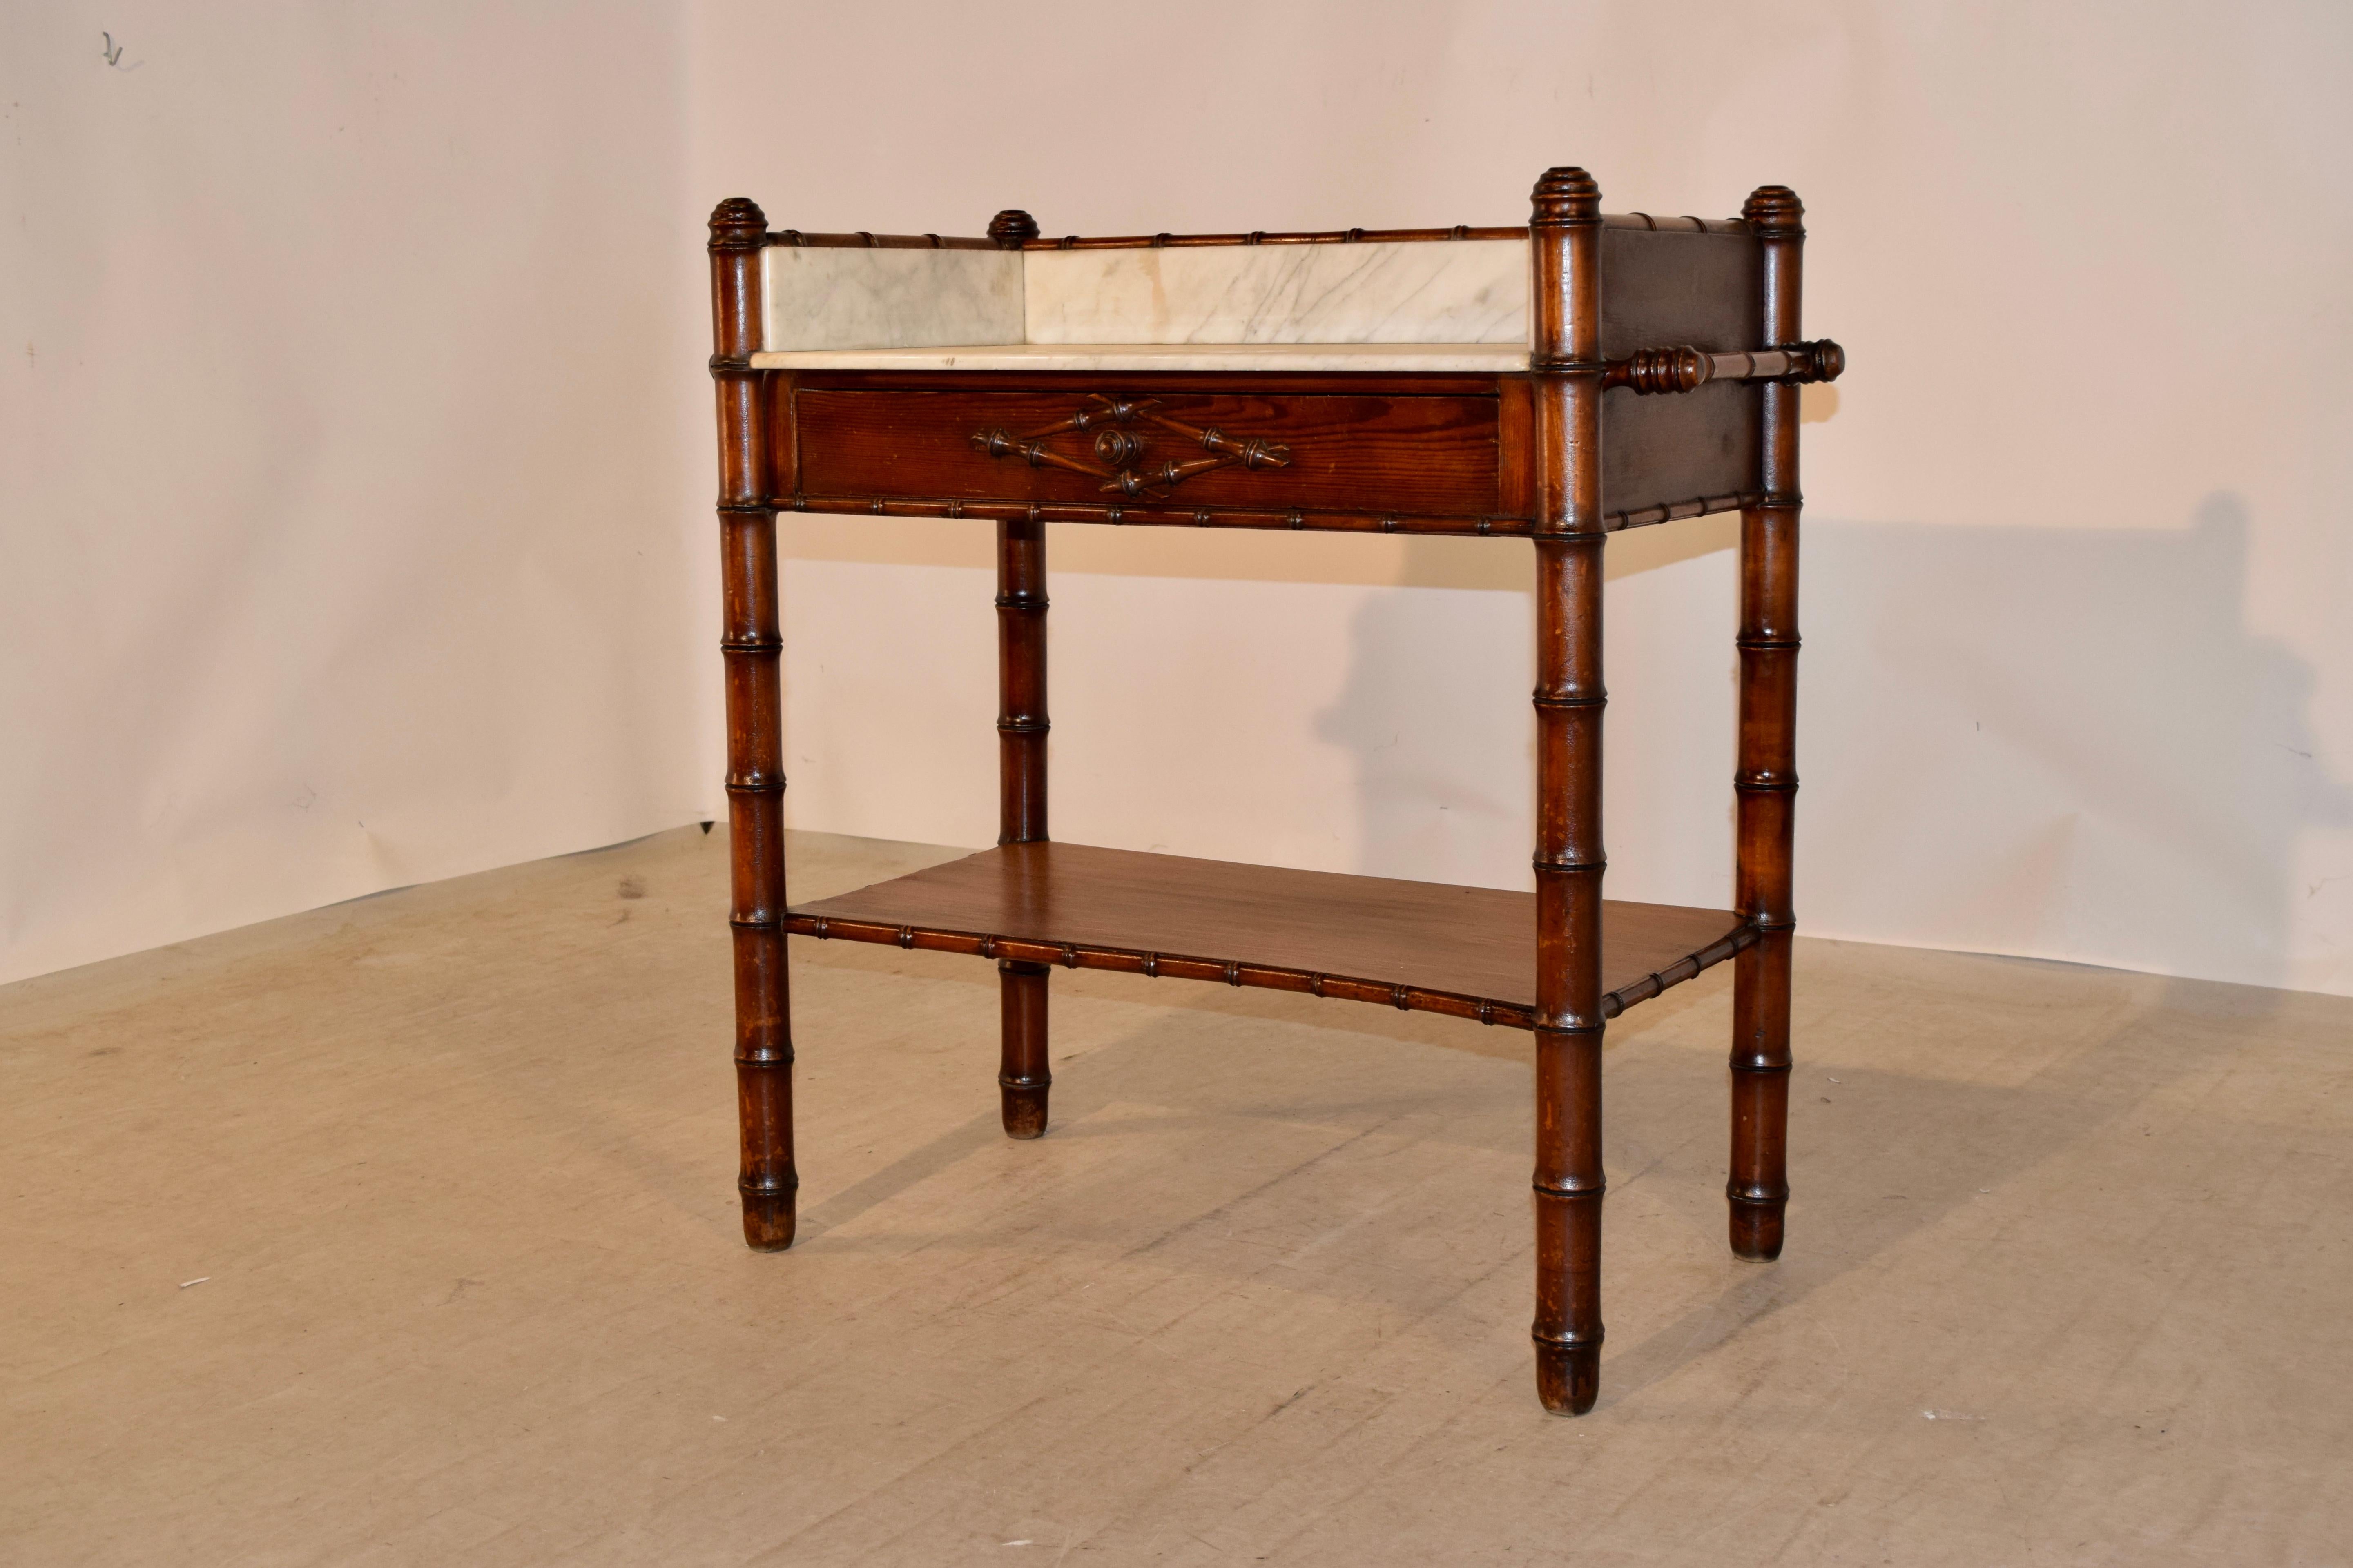 19th century French wash stand made from cherry and pitch pine. The top is made from marble and has a gallery around the back and sides. The sides have hand-turned towel rails and the front contains a single drawer. The legs are hand turned in the